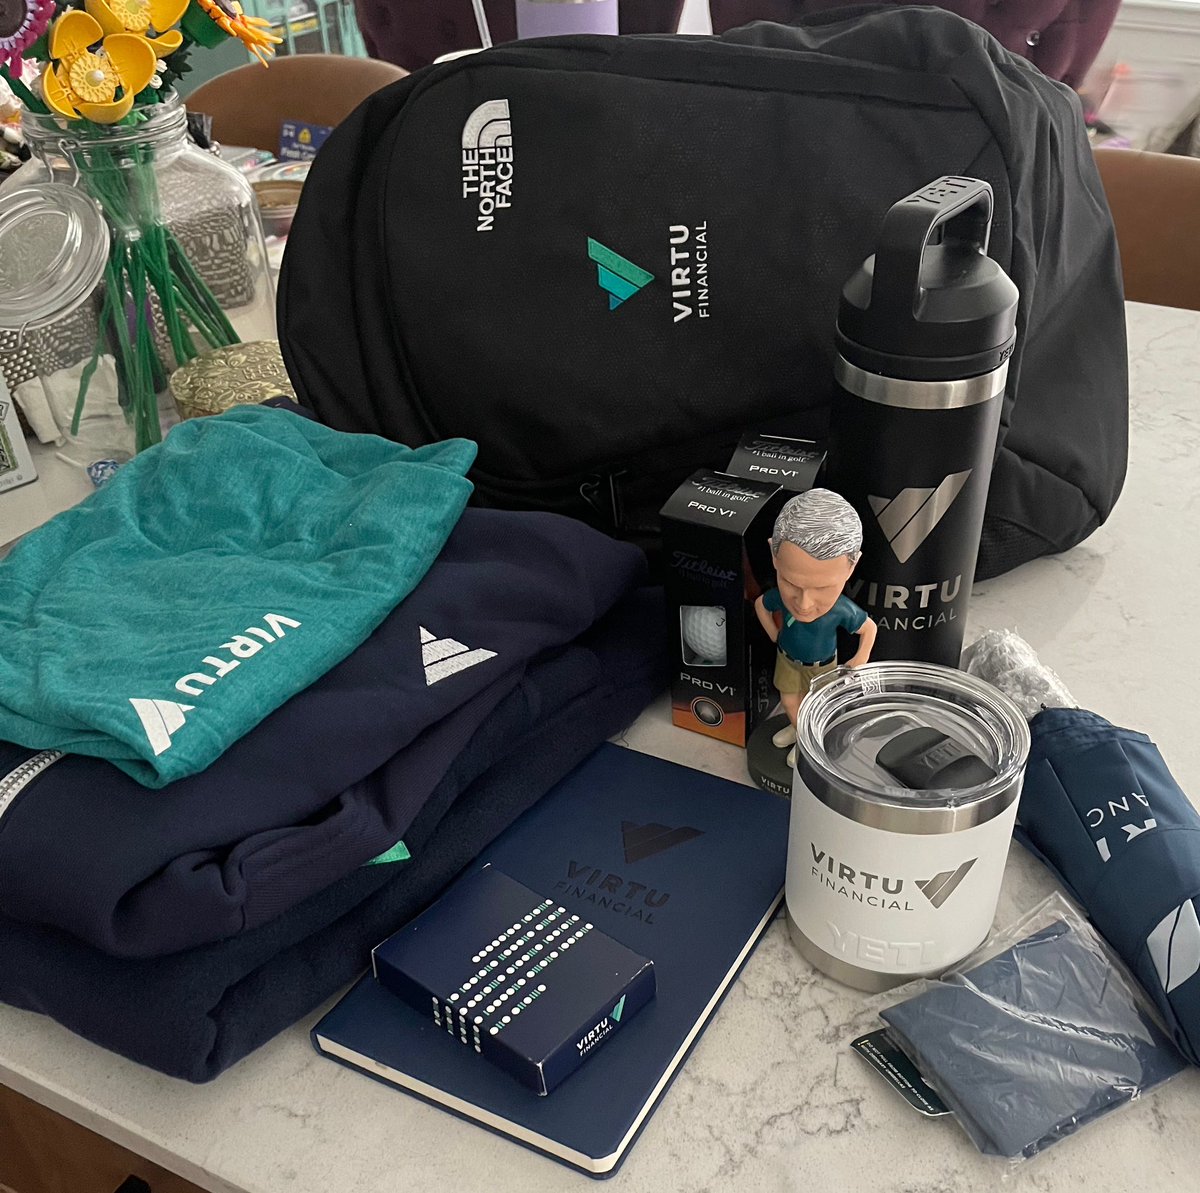 OMG…just received my Virtu Summer 2024 shill kit! Have you @pulte shills received your kits yet?? 😂😂 Post ‘em up!! Look at that @Dougielarge cutie patootie bobblehead! 😍💋